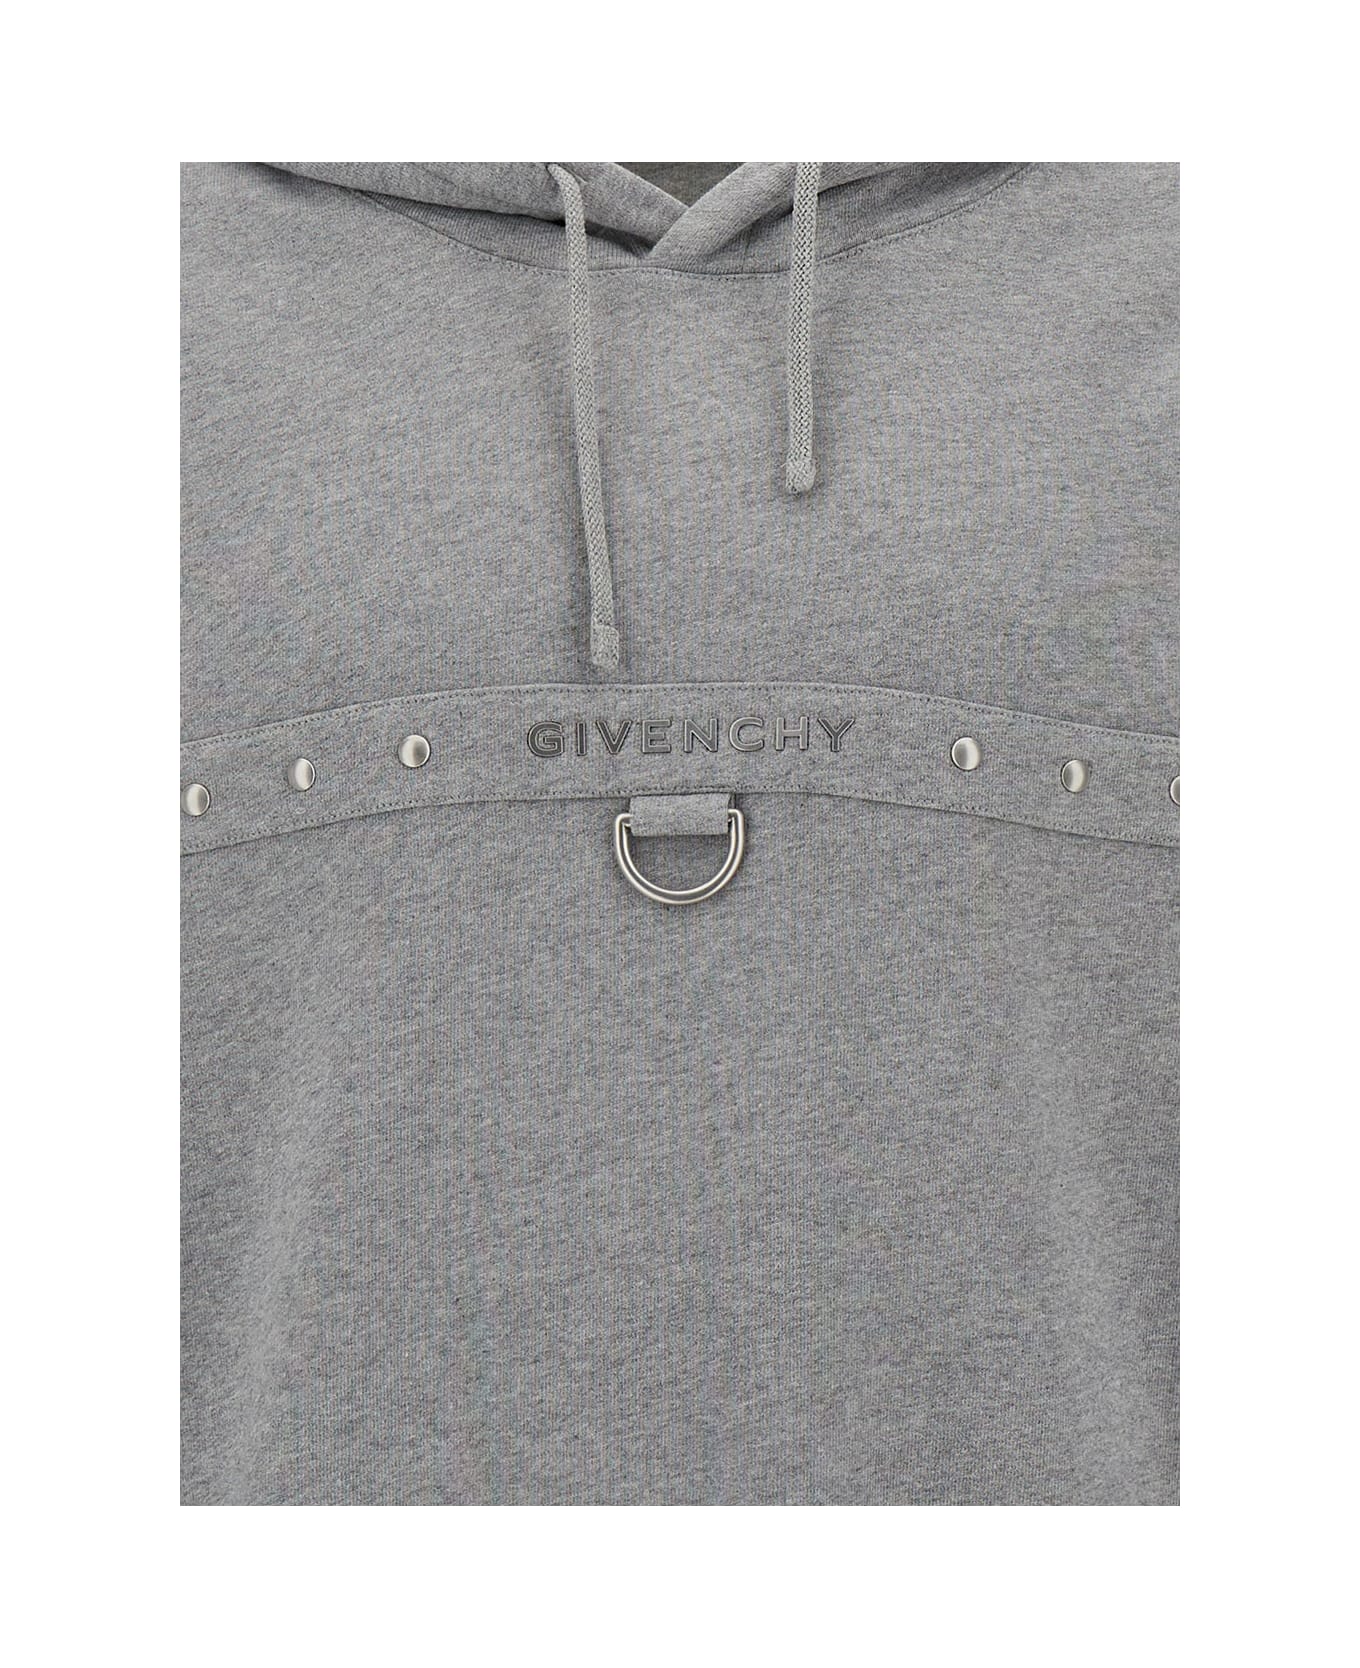 Givenchy Grey Hoodie With Logo And Studs In Cotton Man - Grey